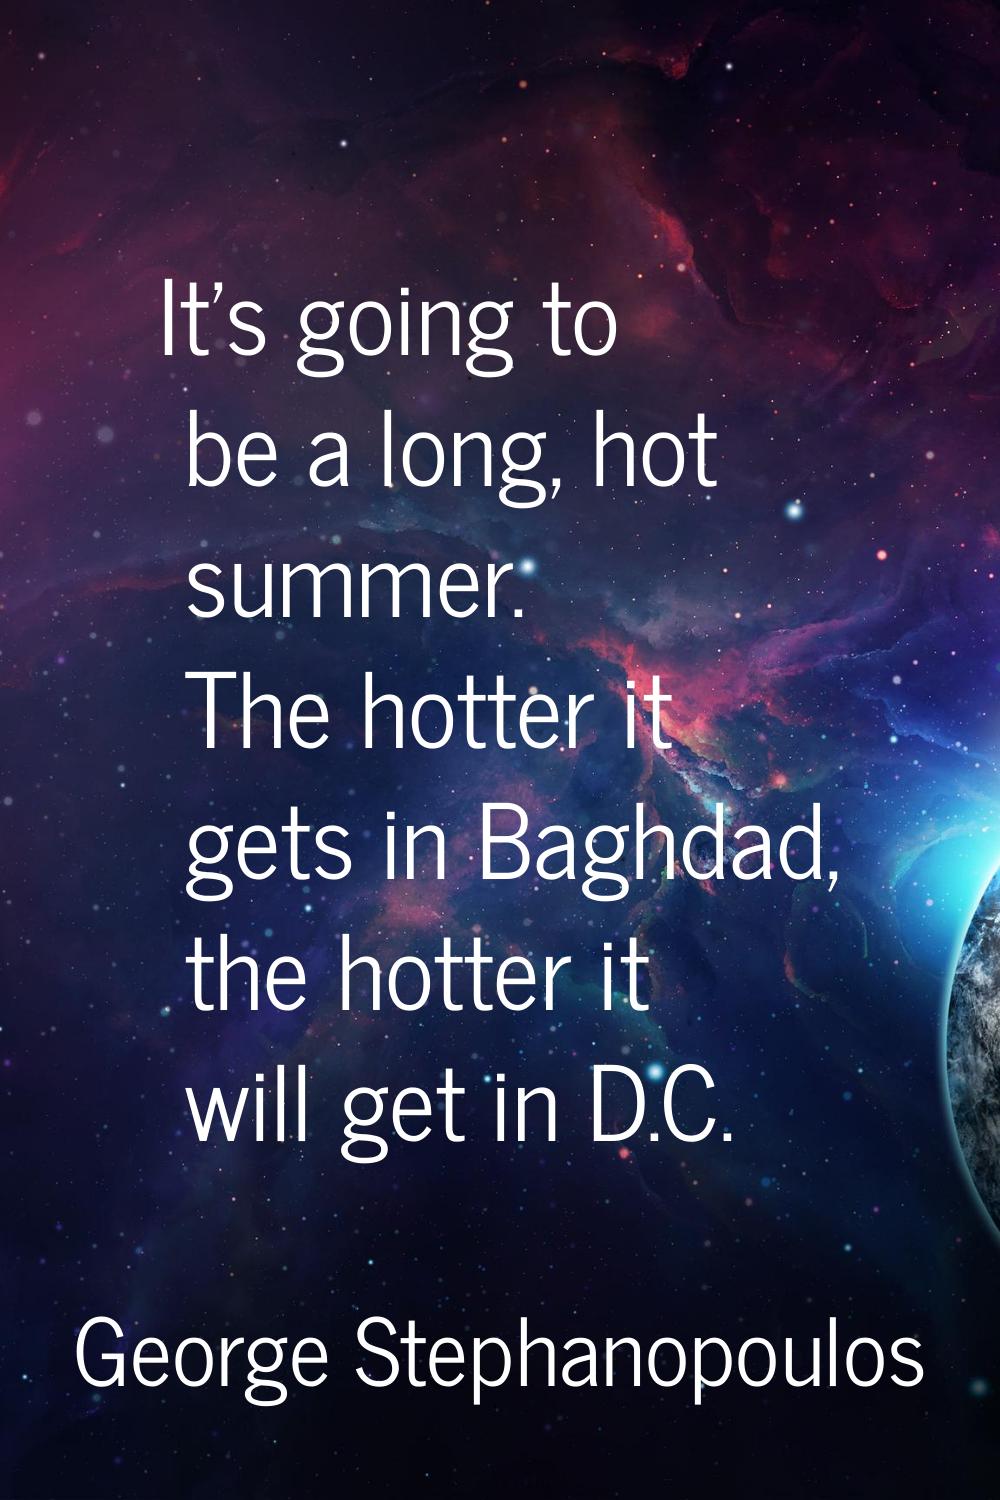 It's going to be a long, hot summer. The hotter it gets in Baghdad, the hotter it will get in D.C.